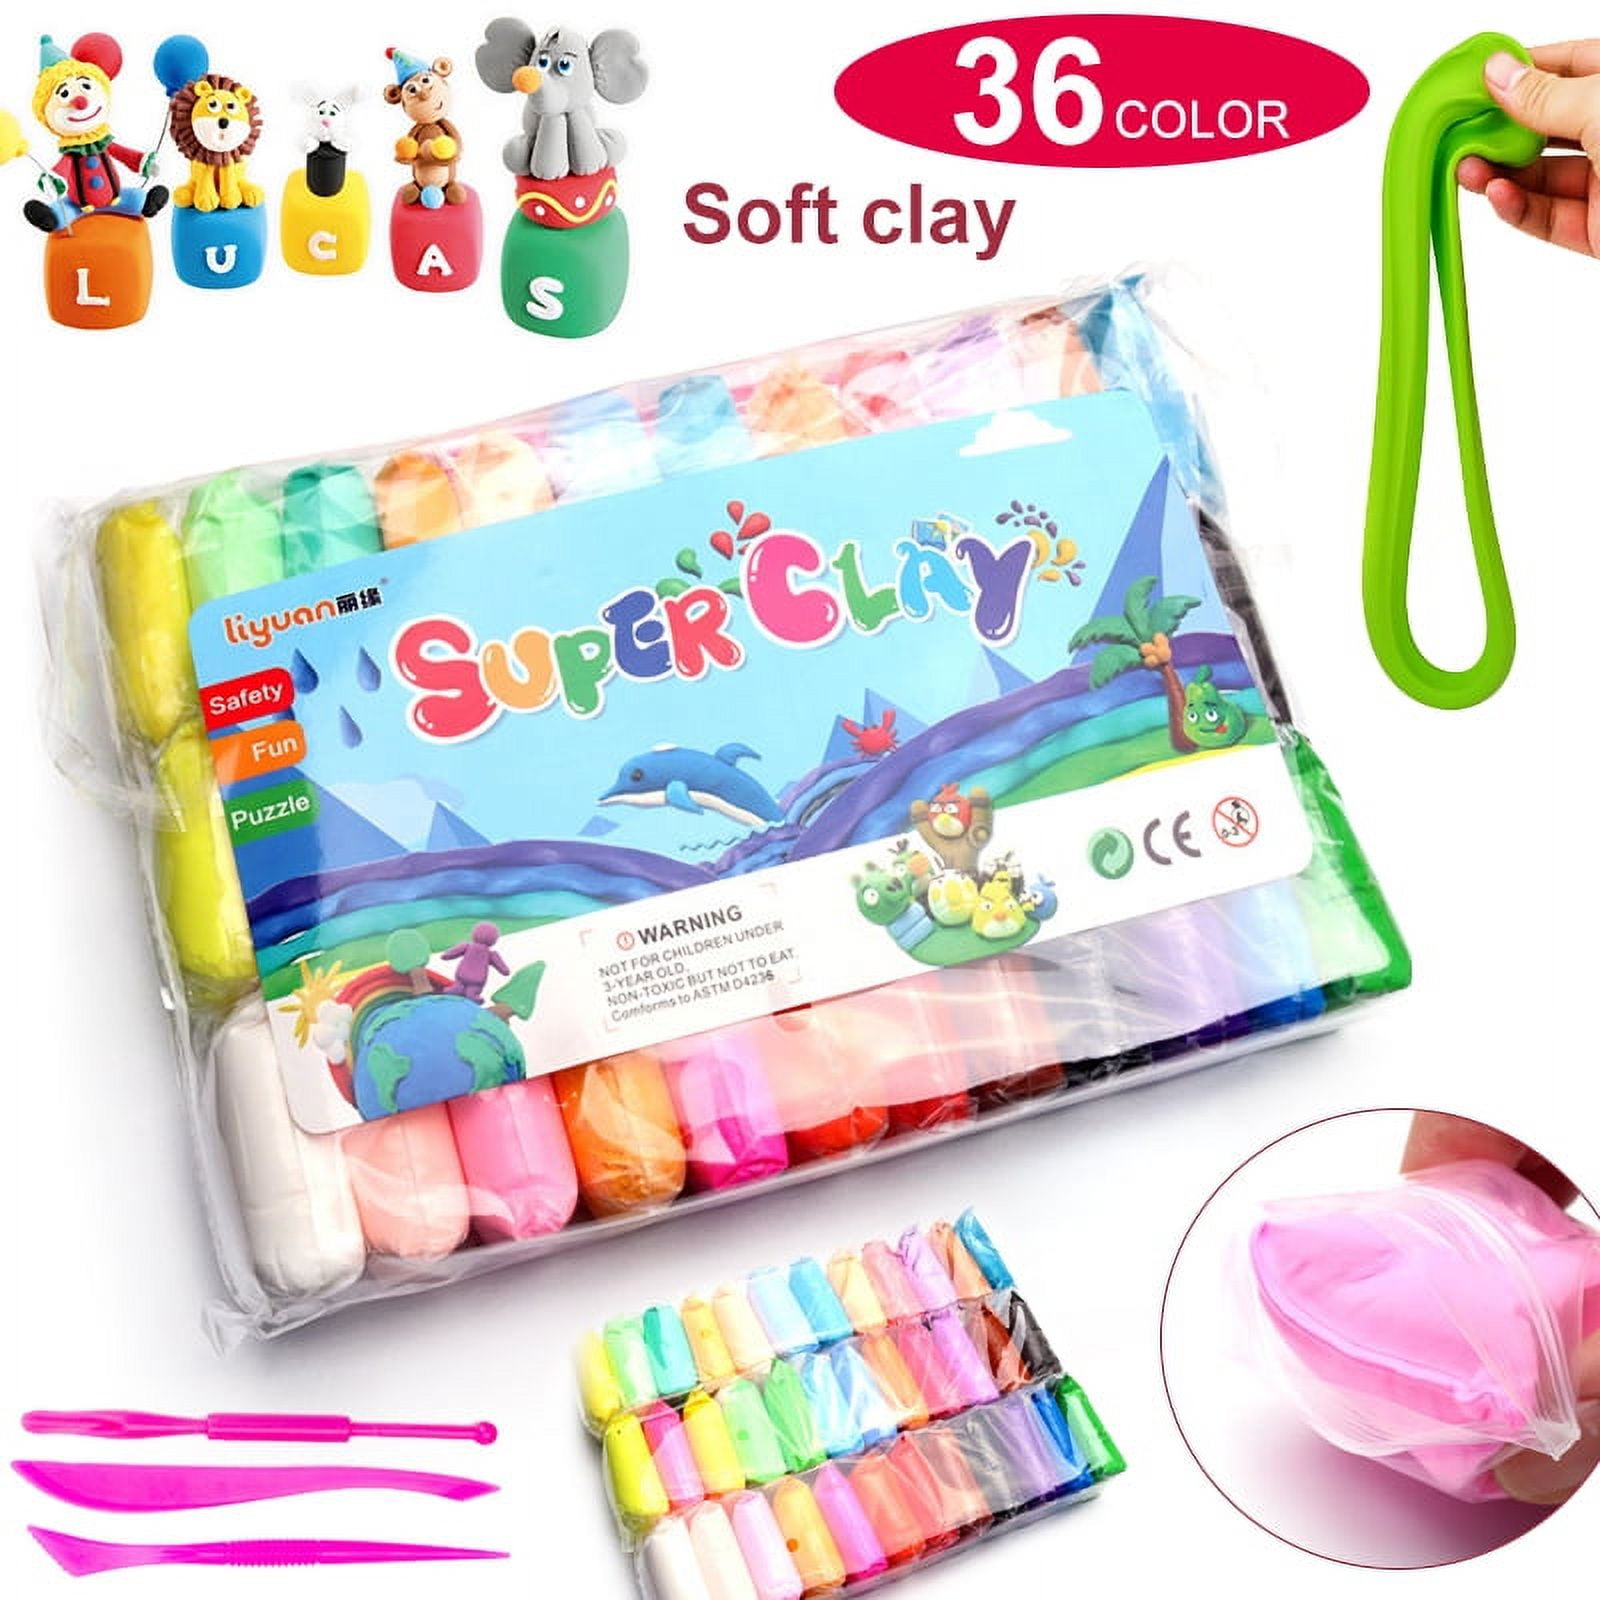 Magic Clay - Air Dry Clay 48 Colors, Modeling Clay for Kids with Tools,  Soft & Ultra Light, Toys Gifts for Age 3 4 5 6 7 8+ Years Old Boys Girls  Kids